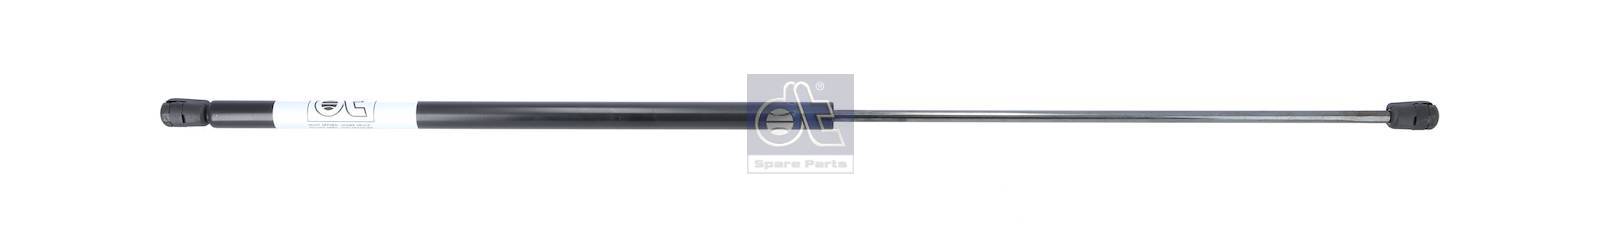 LPM Truck Parts - GAS SPRING (81970060029)